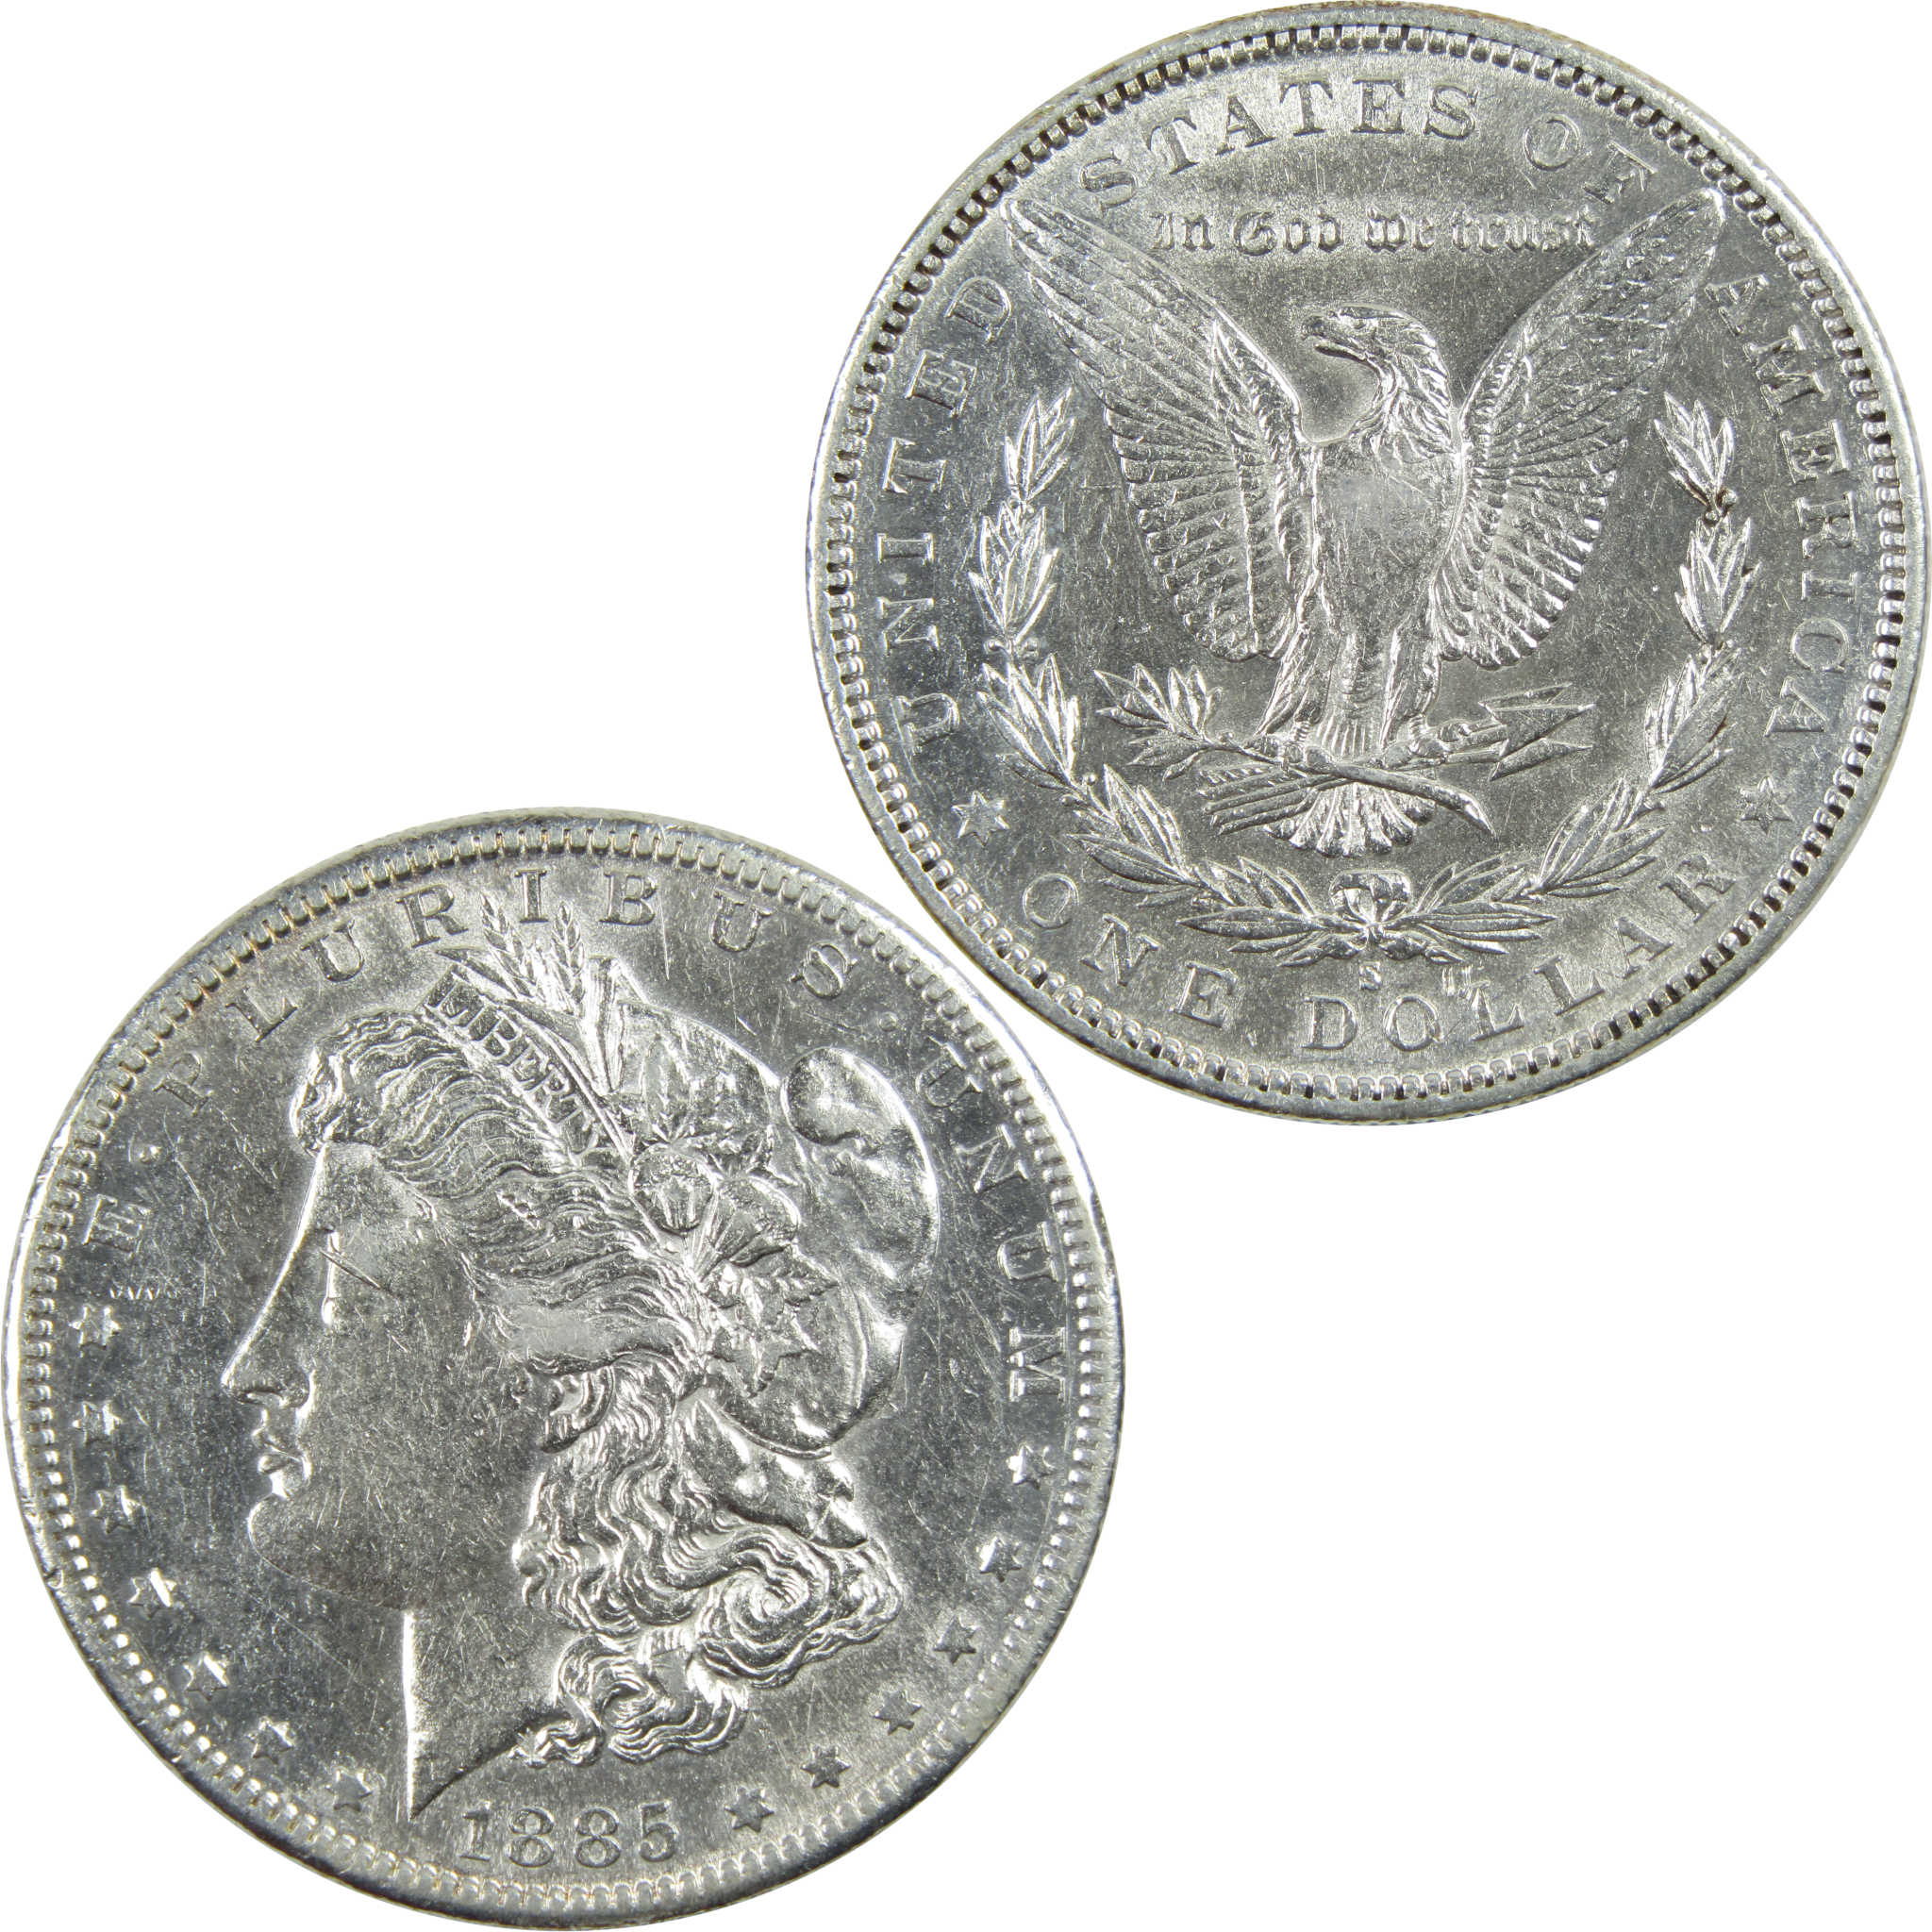 1885 S Morgan Dollar AU About Uncirculated Details Silver SKU:I11697 - Morgan coin - Morgan silver dollar - Morgan silver dollar for sale - Profile Coins &amp; Collectibles